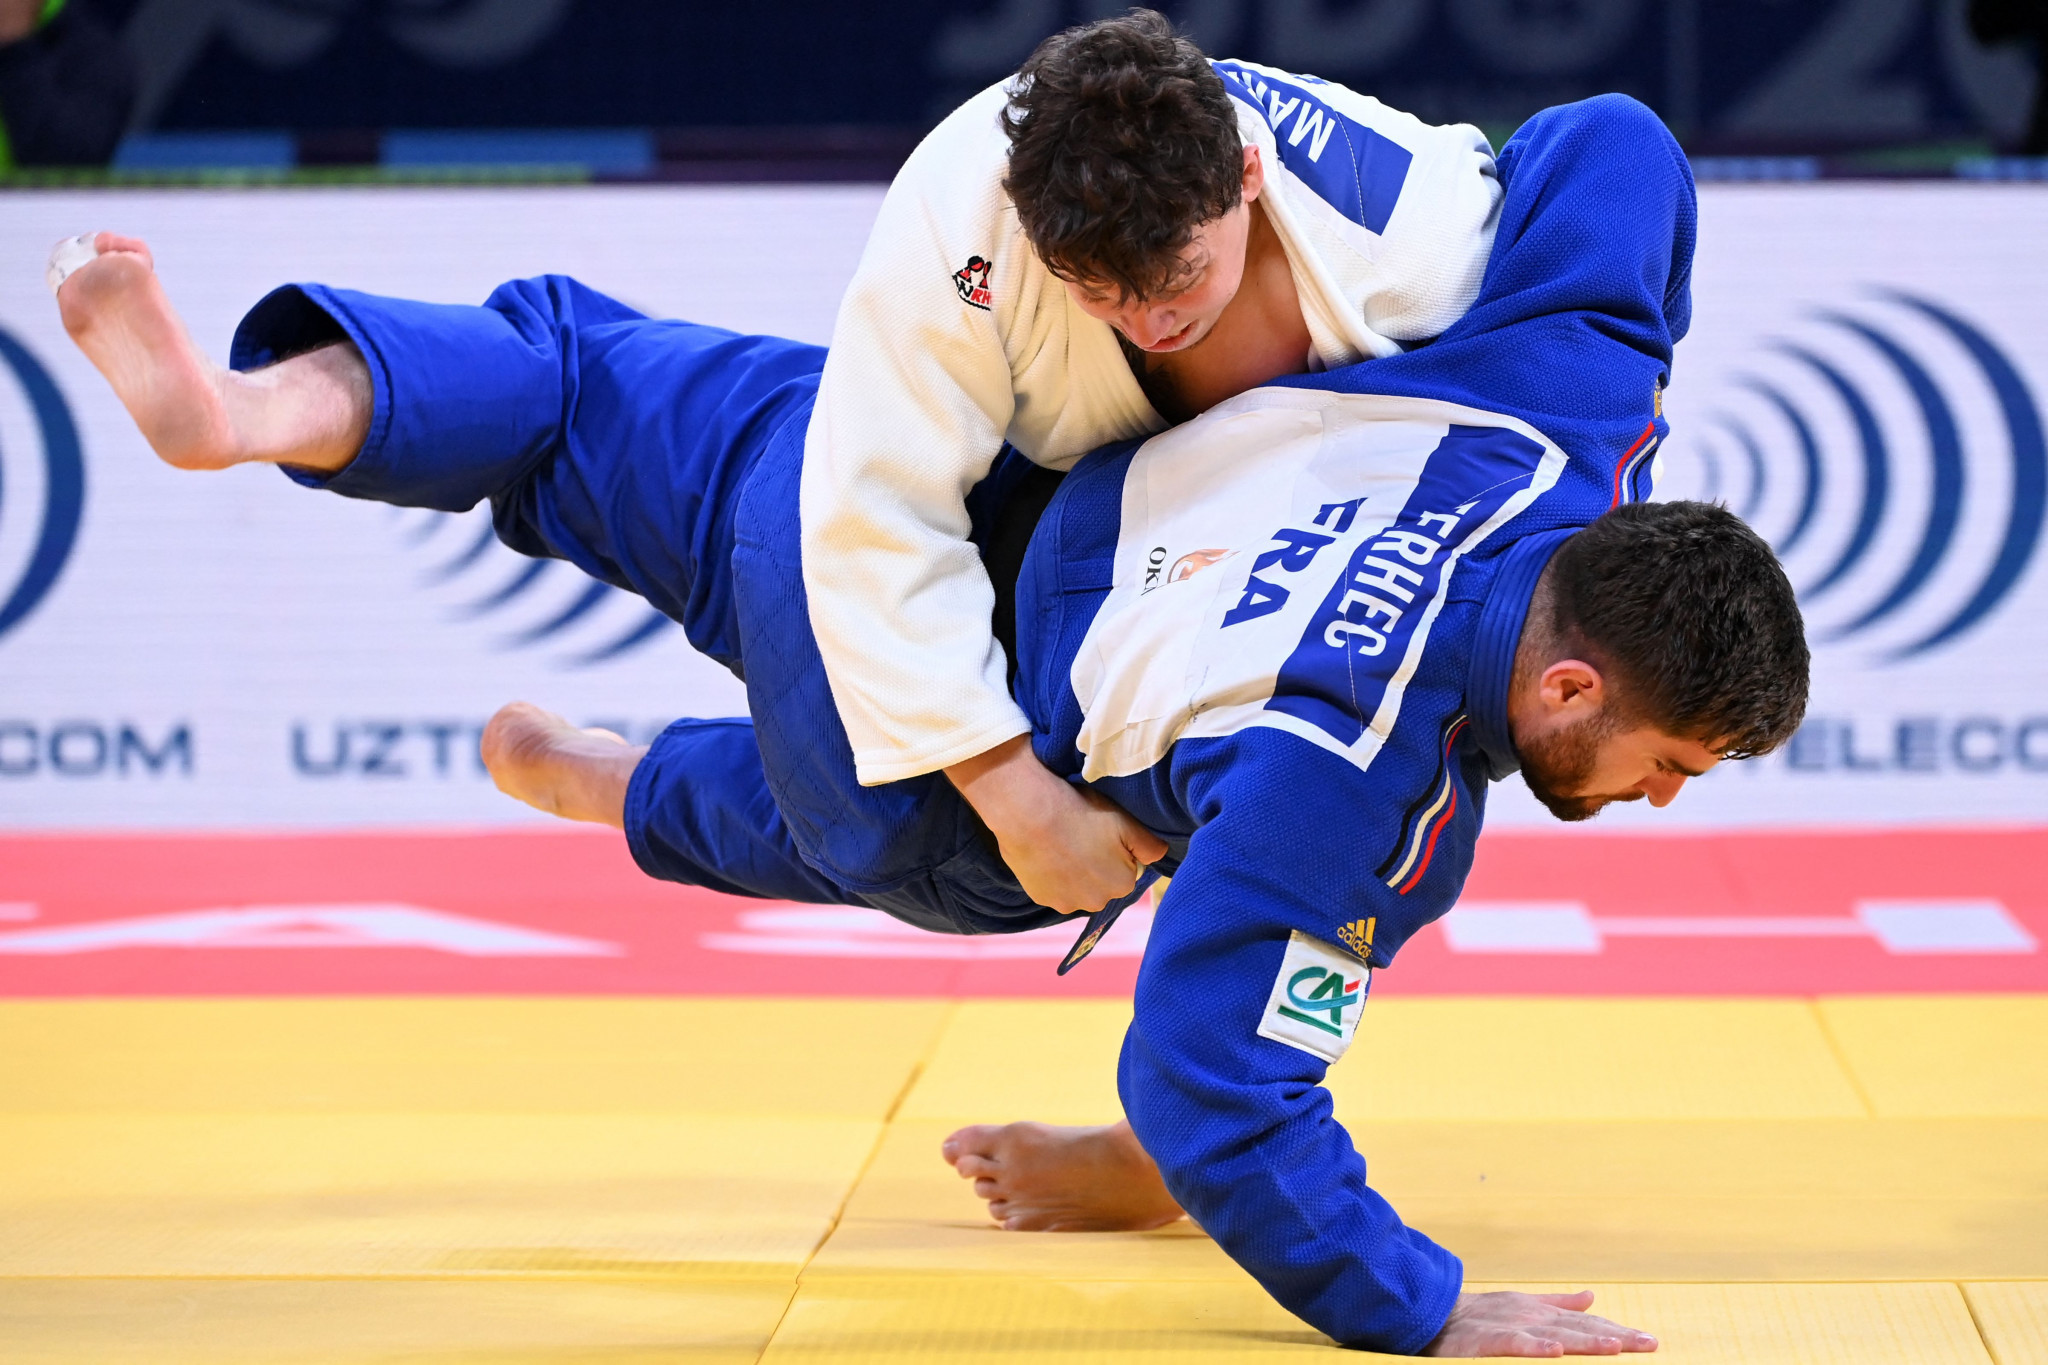 France Judo has made a coaching change ©Getty Images